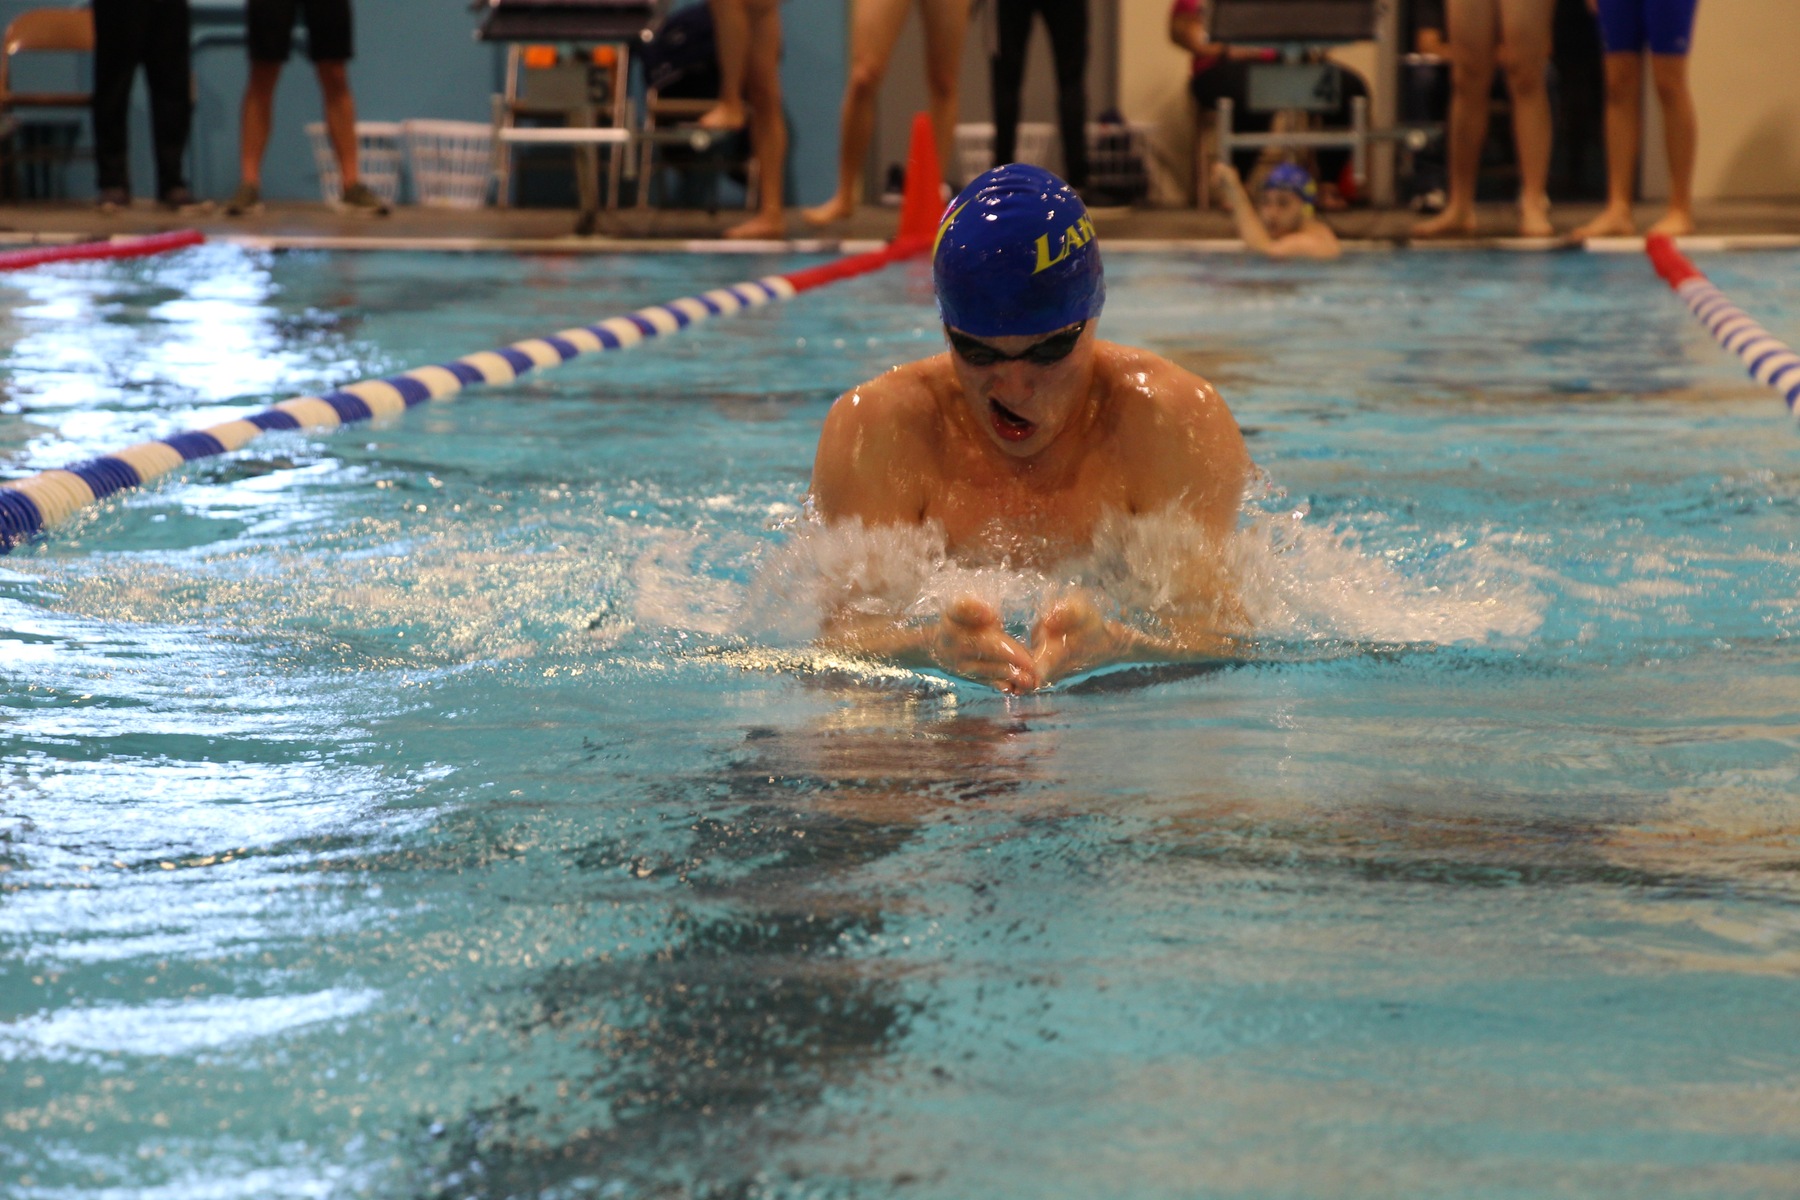 Val Trussov swims his breaststroke leg of the Medley Relay as teammate Jesse Lattin looks on after finishing his backstroke leg.